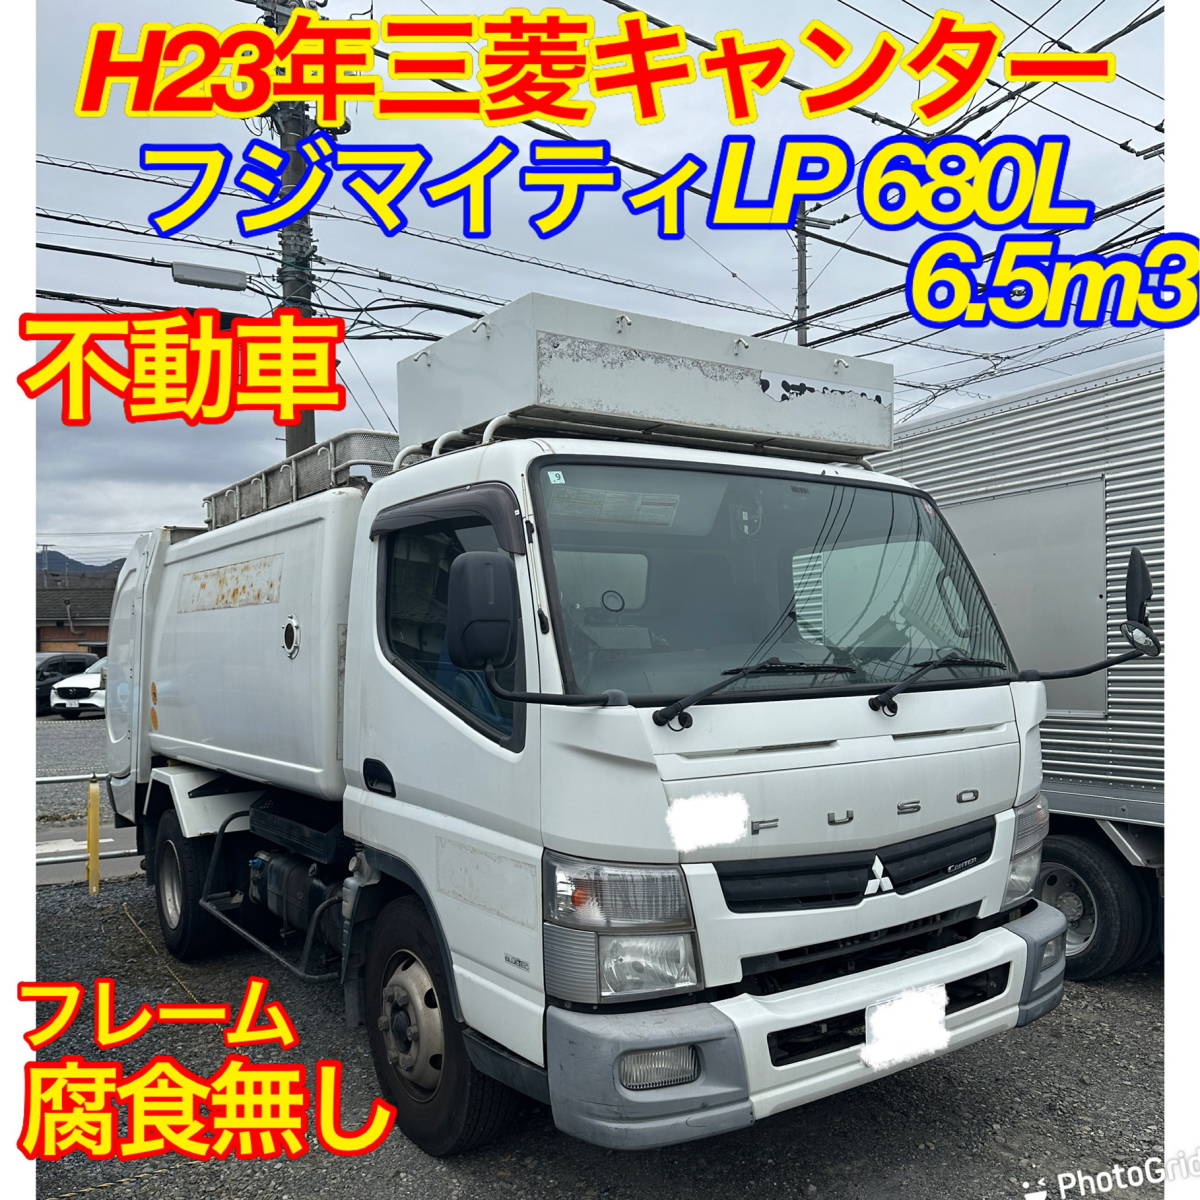 H23 year Mitsubishi Canter MT3 pedal car! frame corrosion less! Fuji mighty made rotary paker car!LP680L! quality goods condition good . moving .. did!